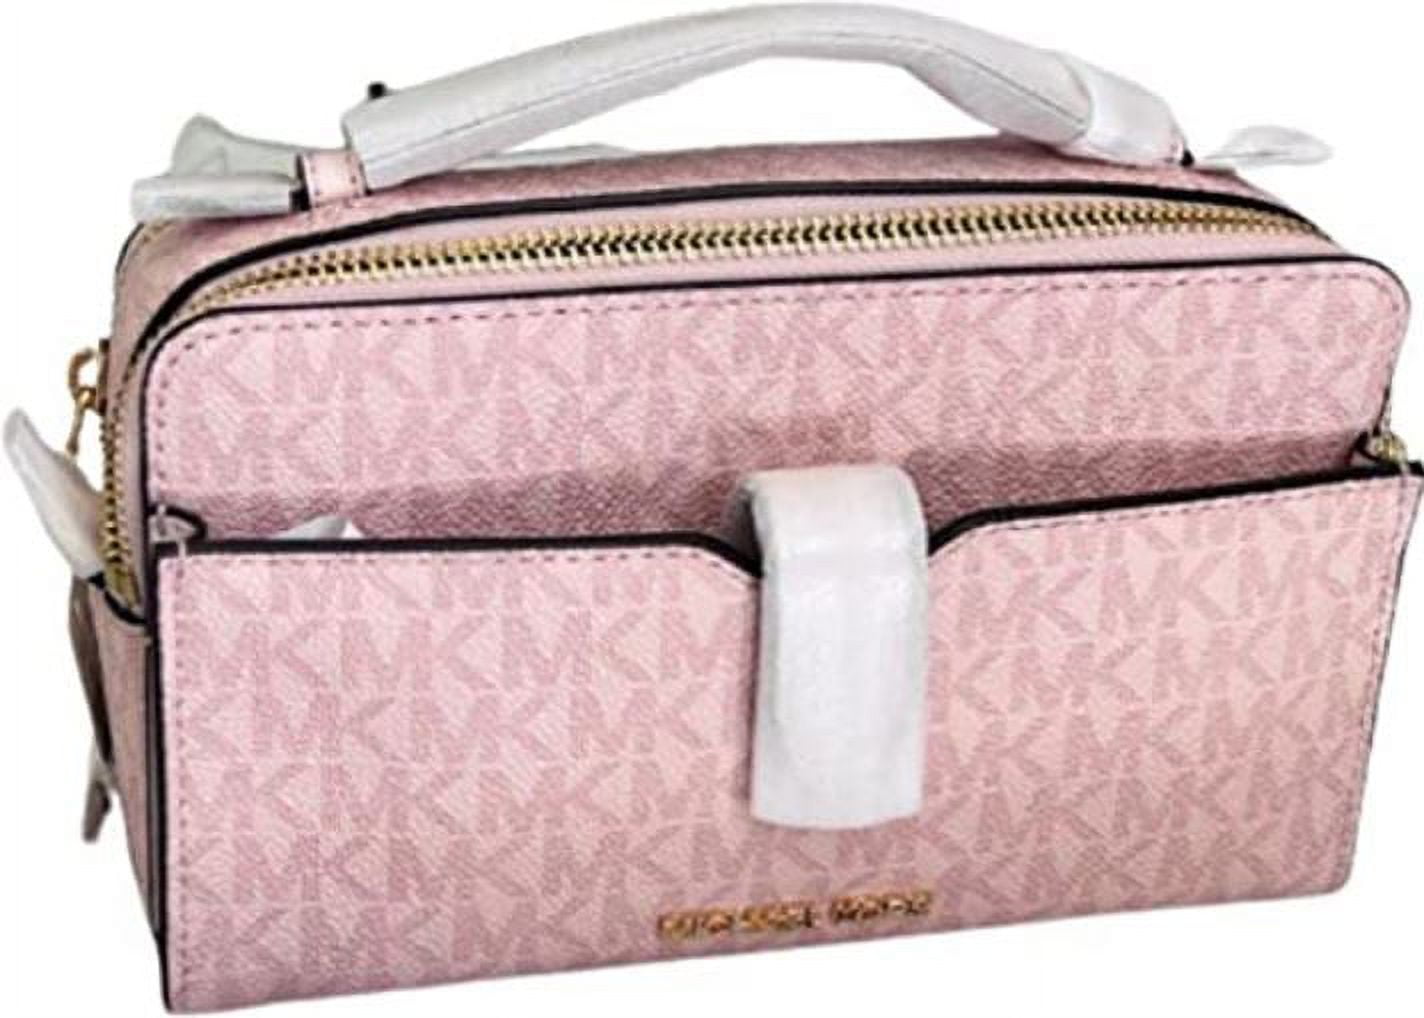 Glamfox - Checker Multi Pouch Crossbody Bag - 2 Colors Available